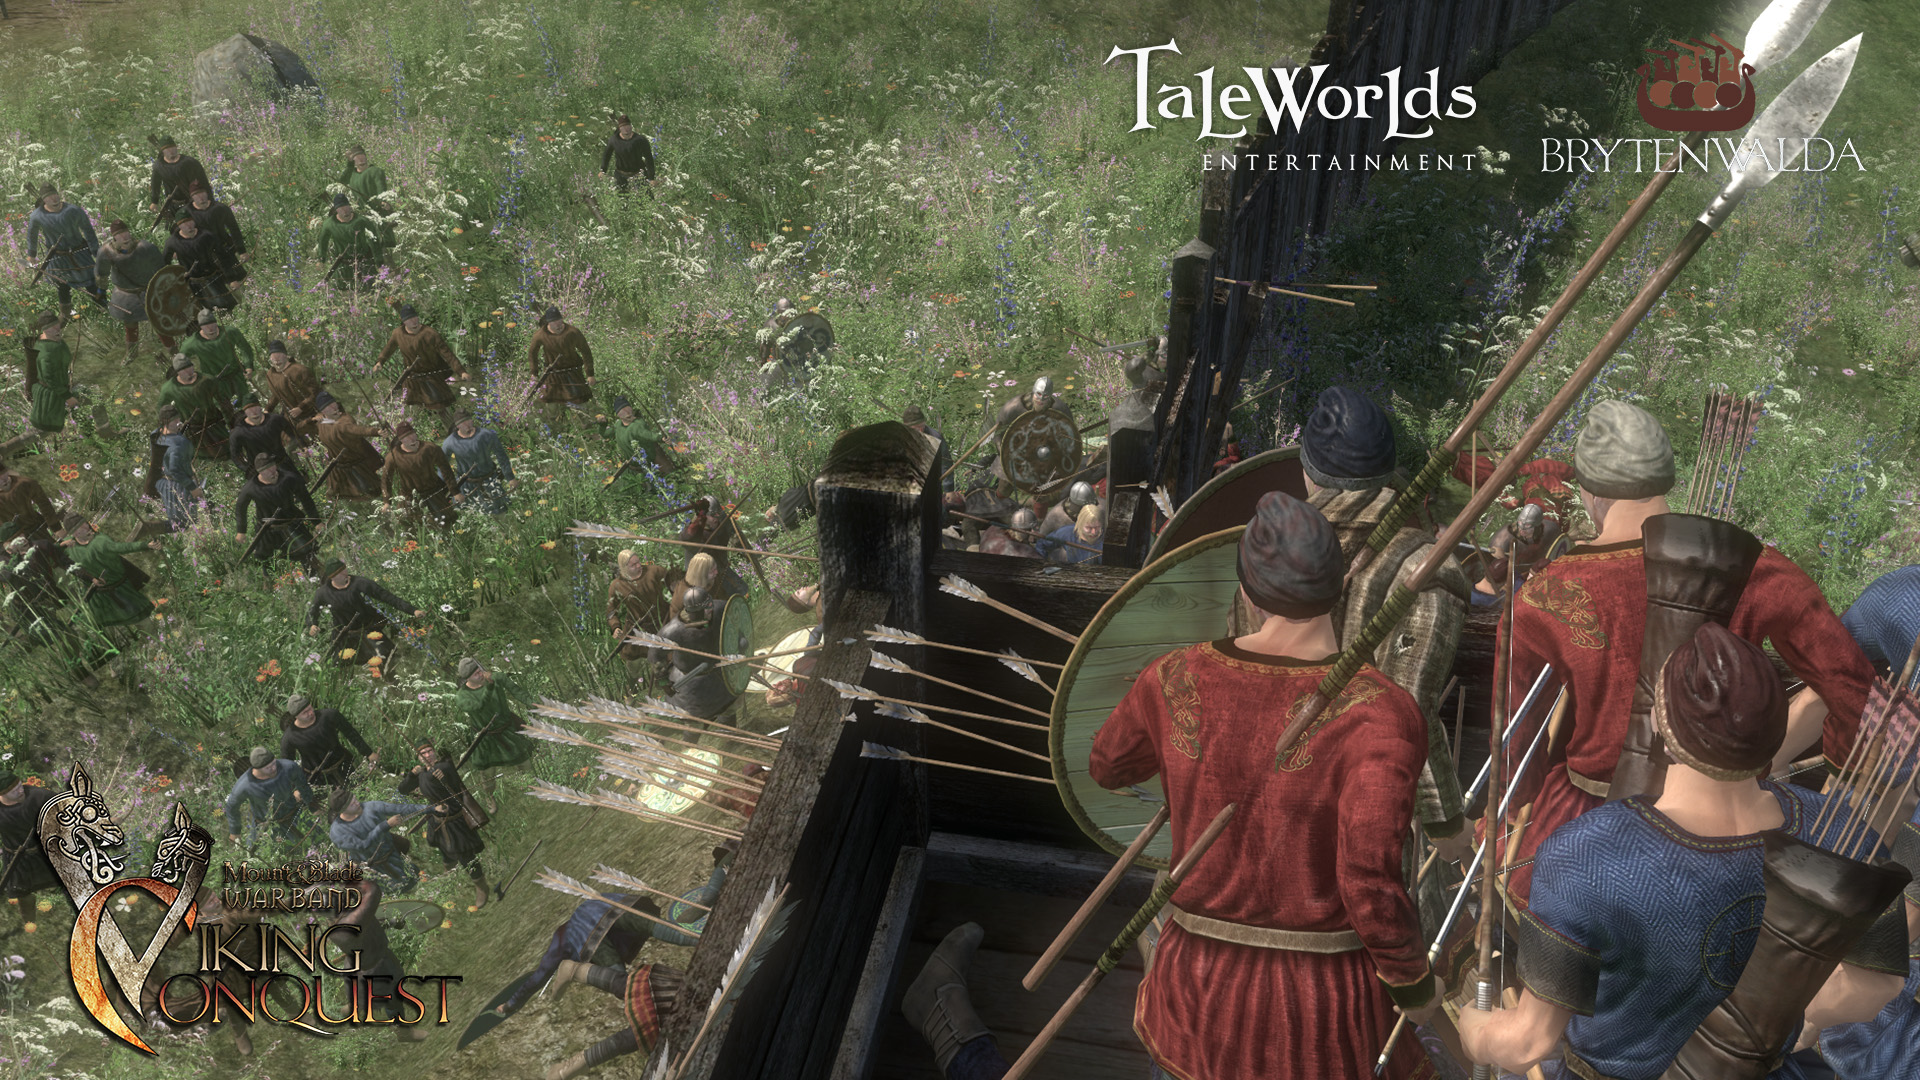 Mount & Blade: Warband - Viking Conquest Reforged Edition screenshot